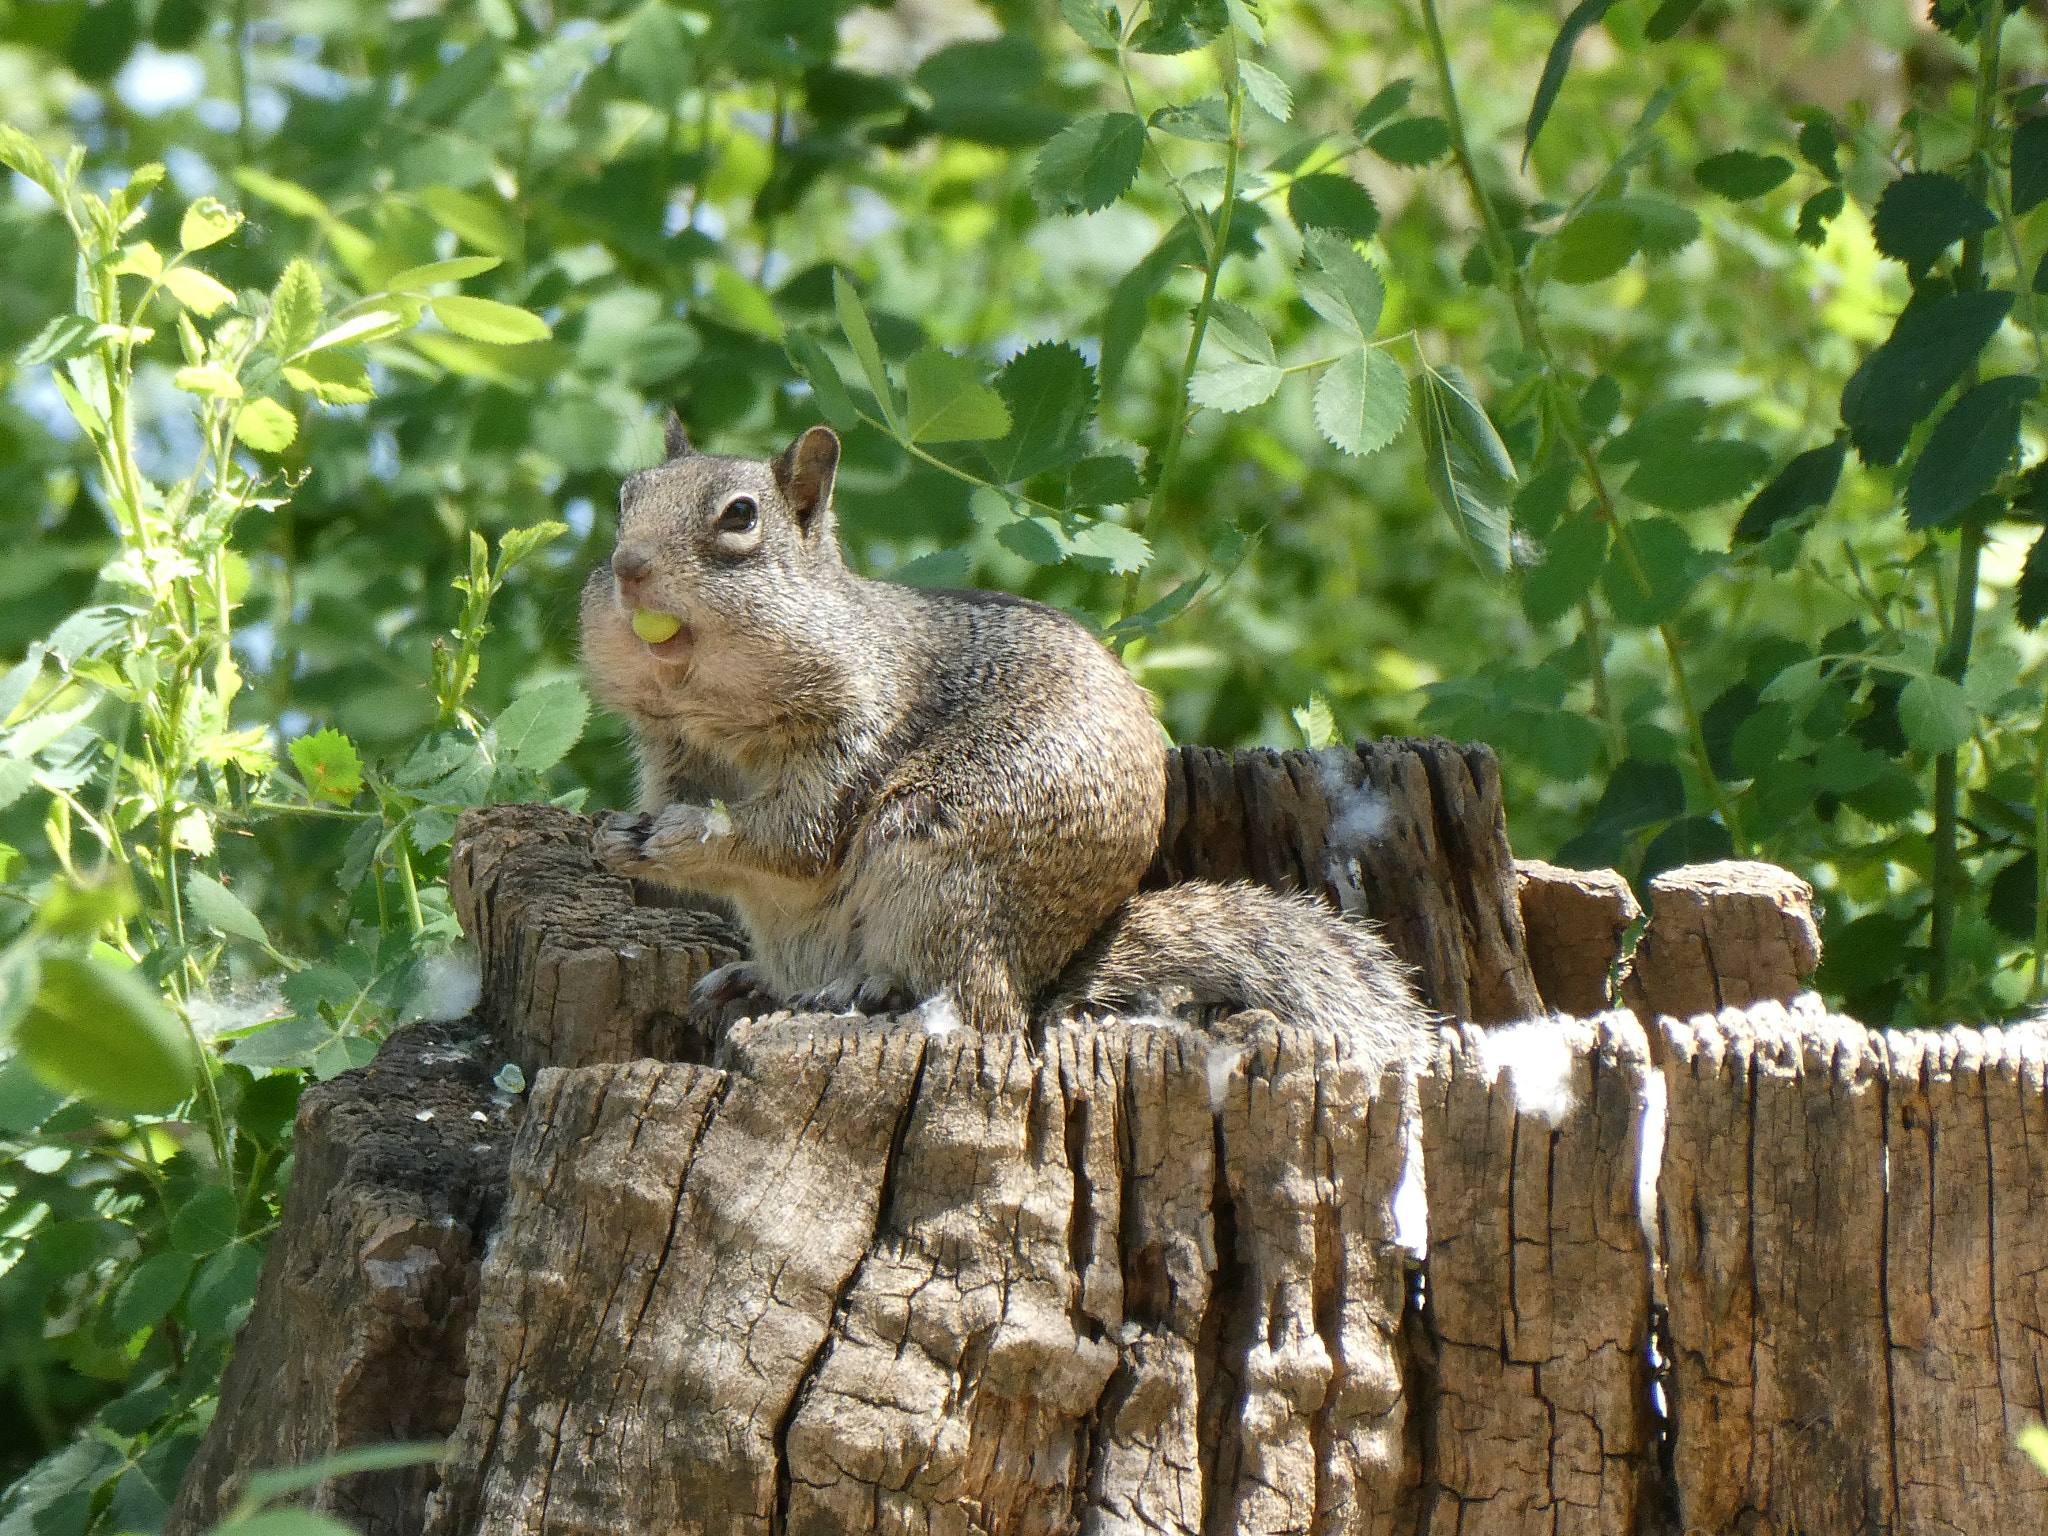 Panasonic DC-ZS70 sample photo. Hungry ground squirrel photography